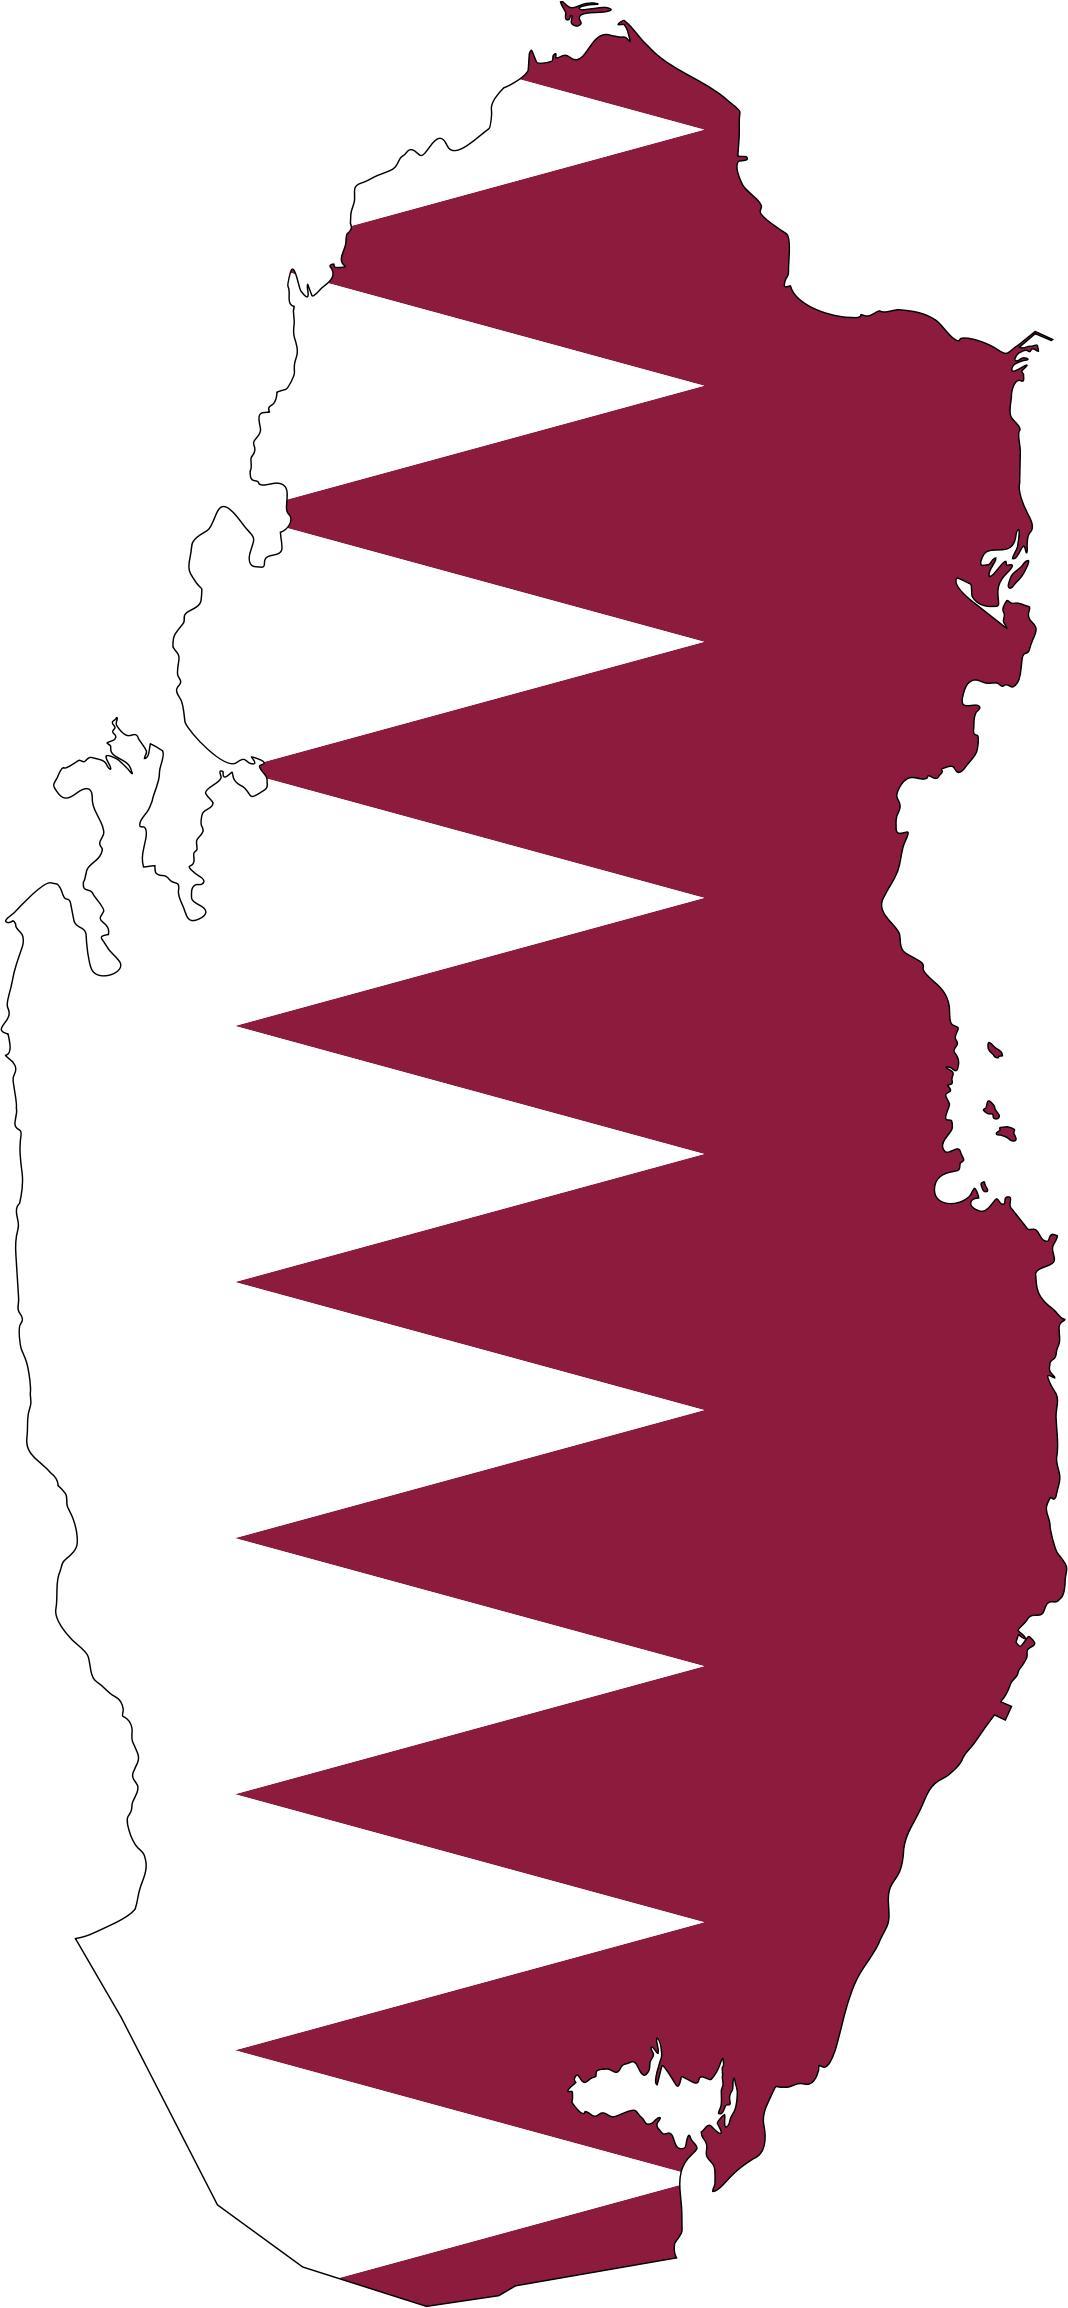 Qatar Map Flag With Stroke png transparent